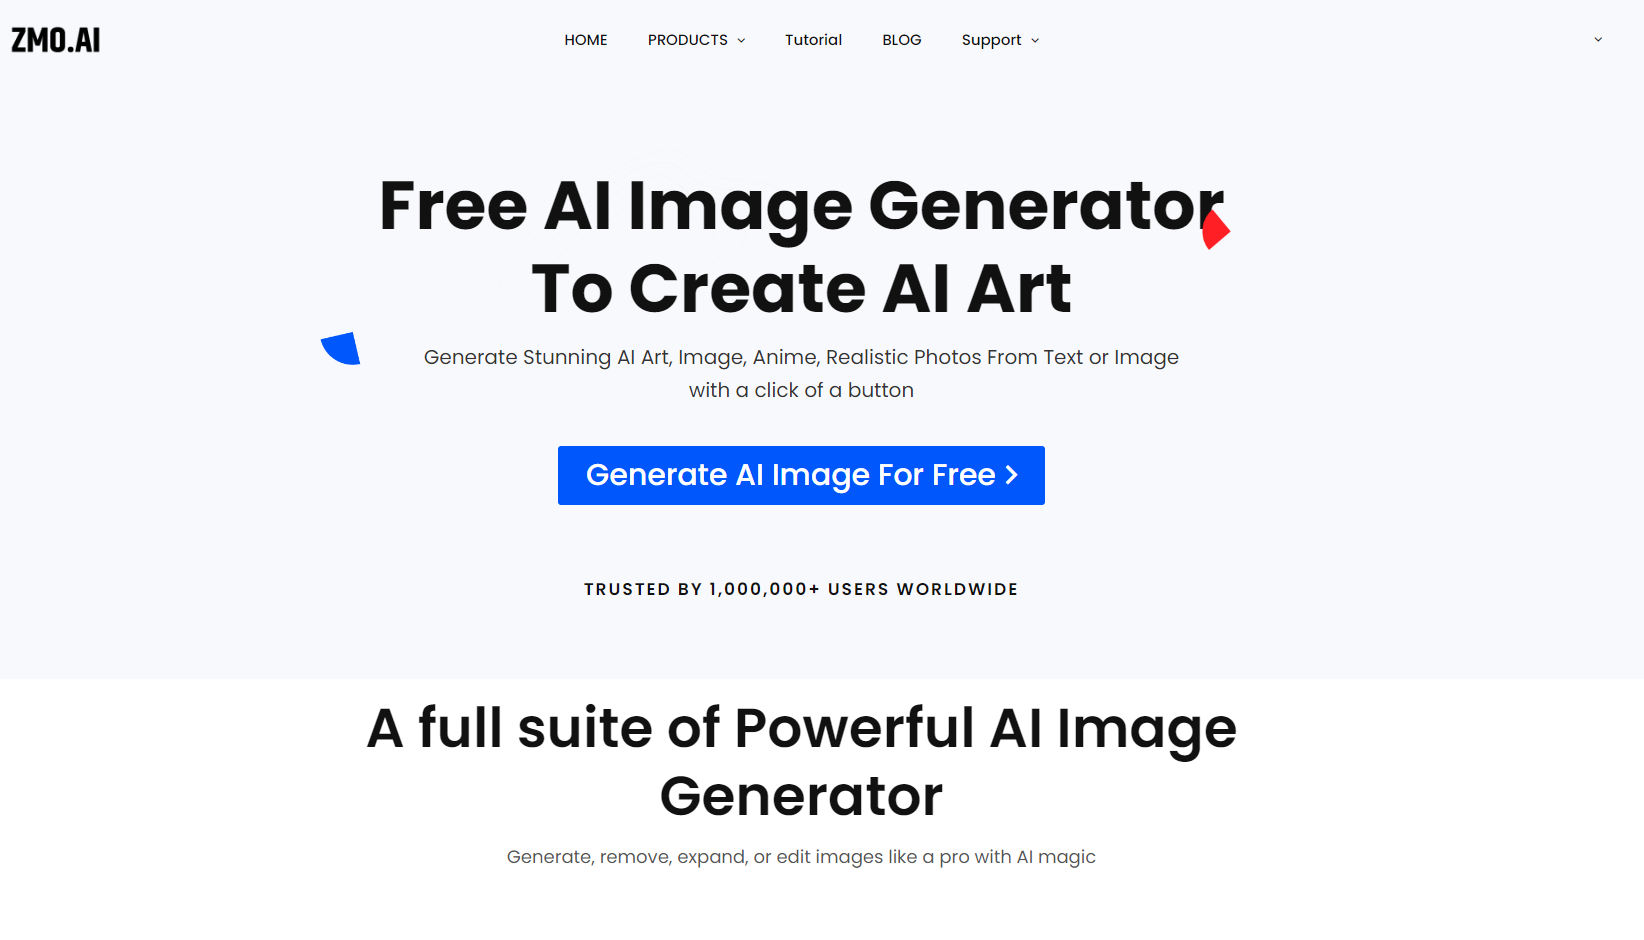 ZMO.AI Generate, remove, expand, or edit images like a pro with AI magic